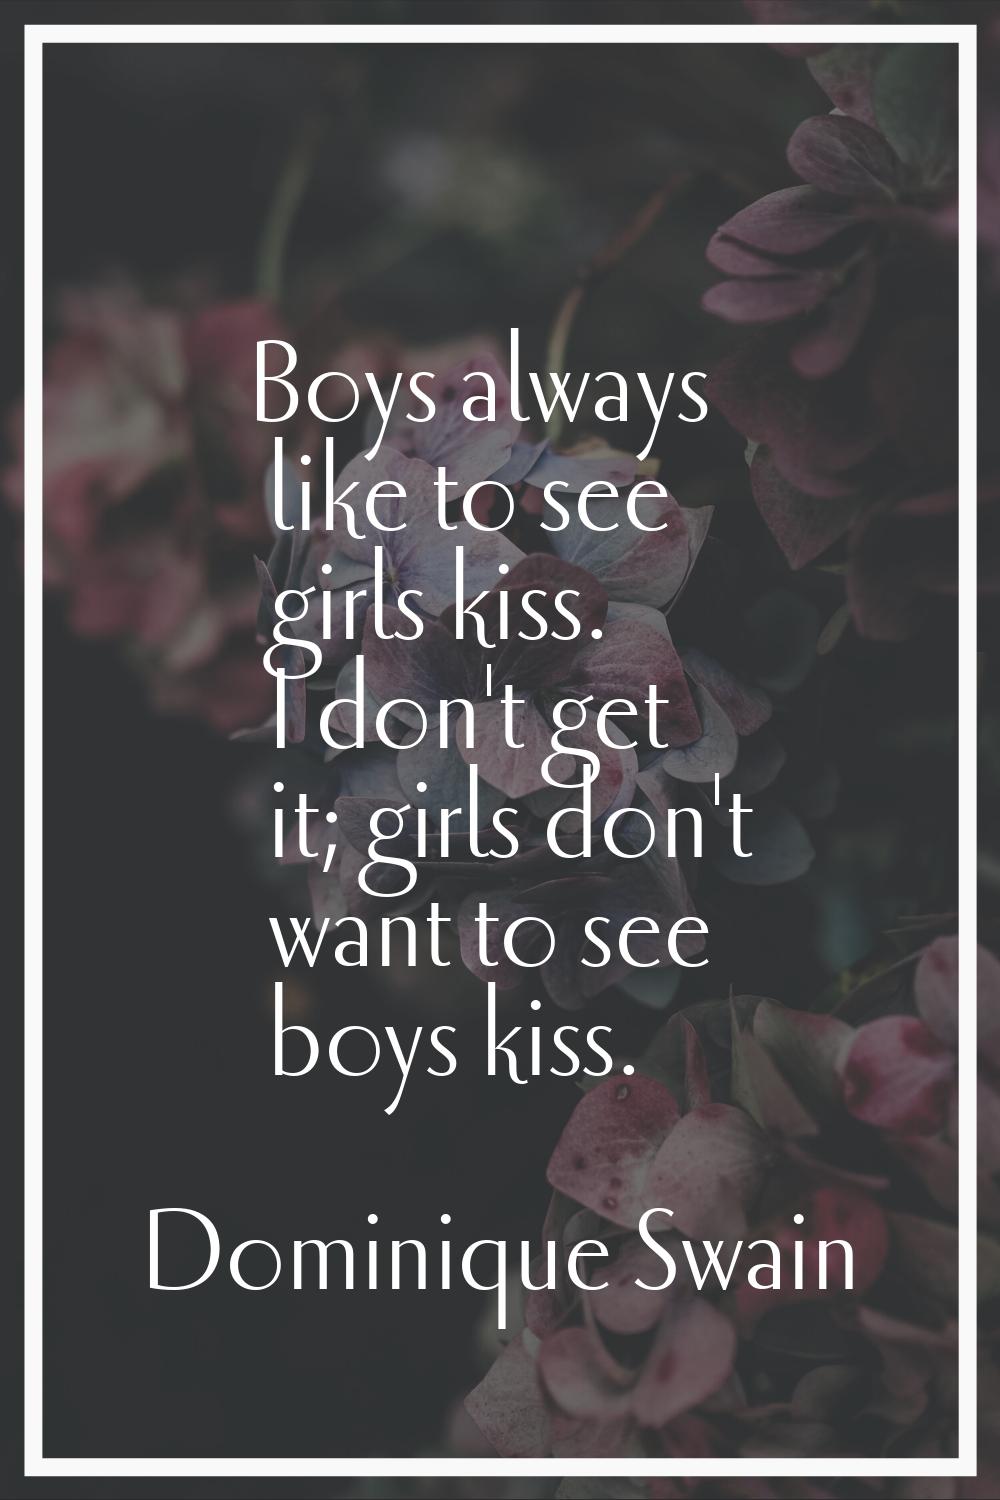 Boys always like to see girls kiss. I don't get it; girls don't want to see boys kiss.